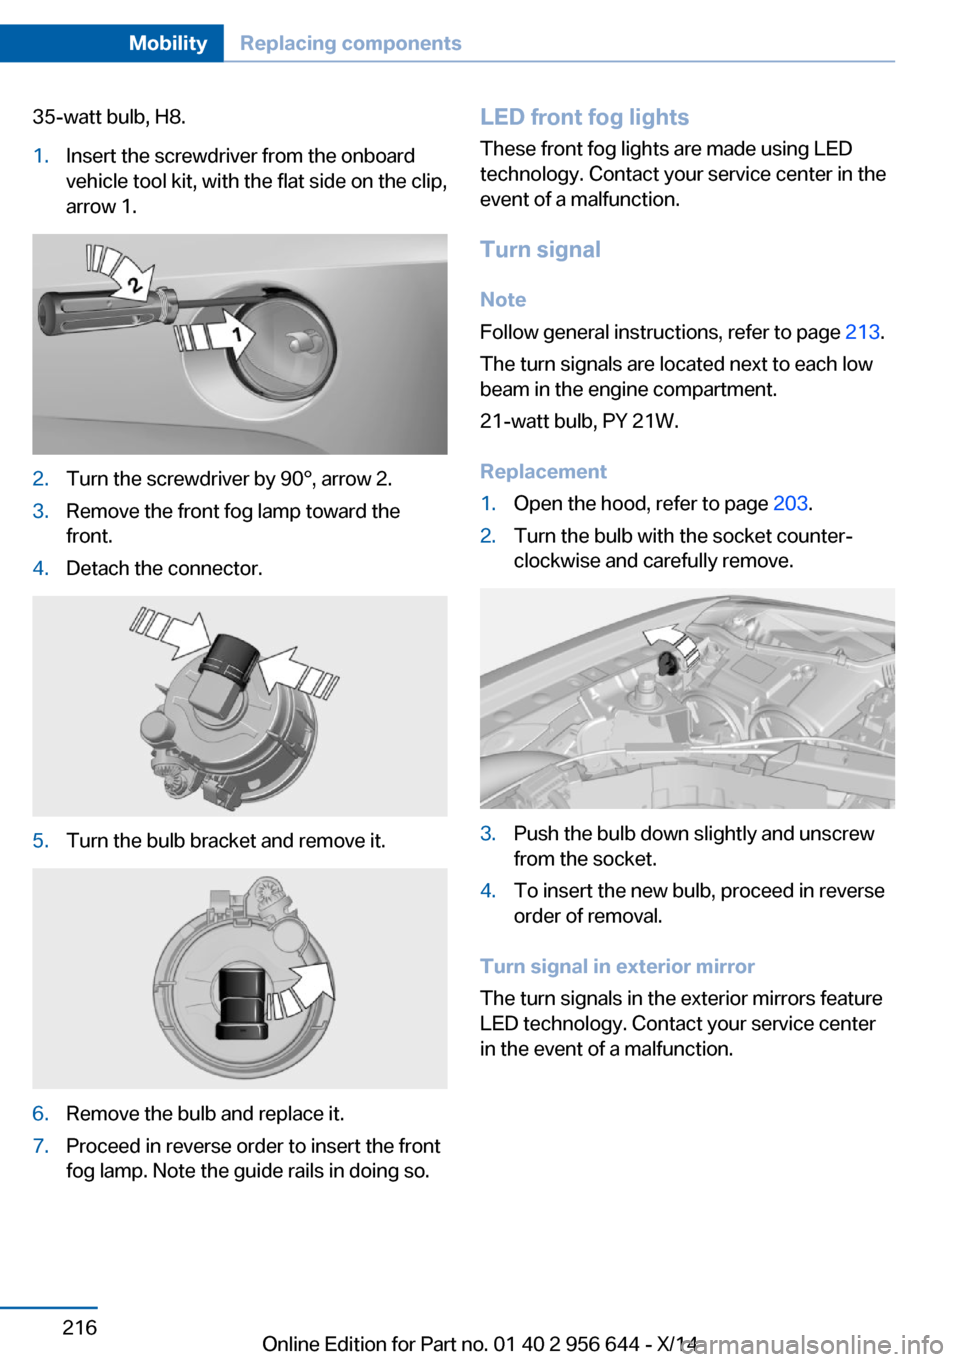 BMW X3 2014 F25 Owners Manual 35-watt bulb, H8.1.Insert the screwdriver from the onboard
vehicle tool kit, with the flat side on the clip,
arrow 1.2.Turn the screwdriver by 90°, arrow 2.3.Remove the front fog lamp toward the
fron